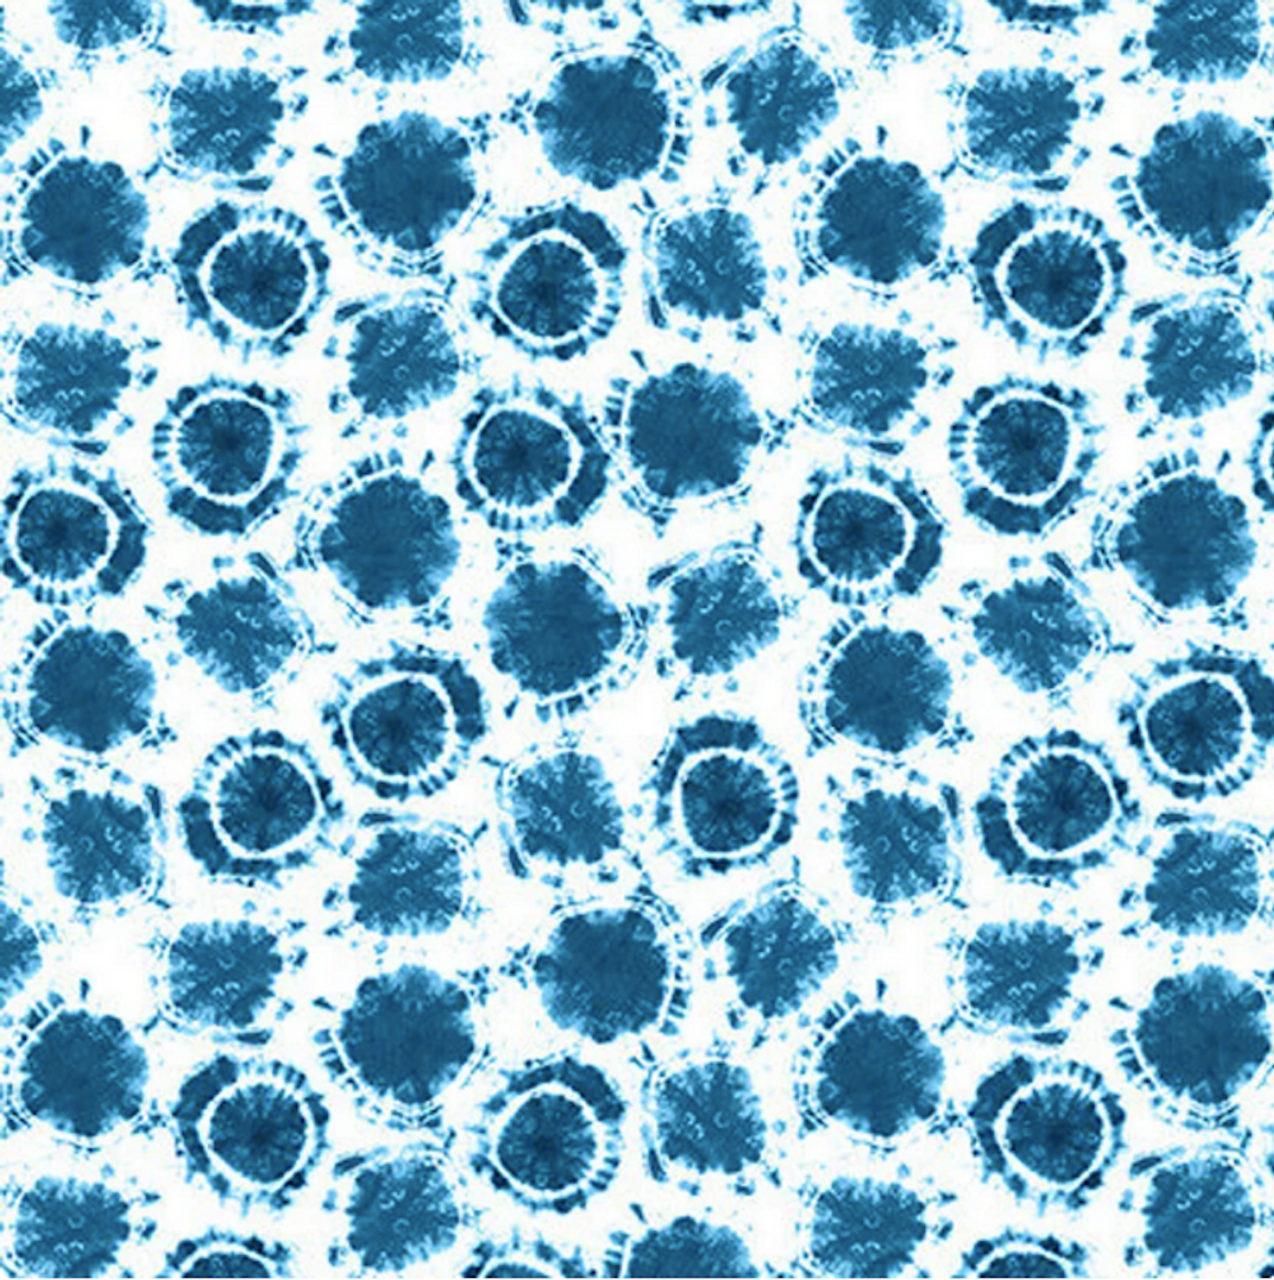 Blank Quilting Katori Small Dot White Blue Cotton Fabric By The Yard